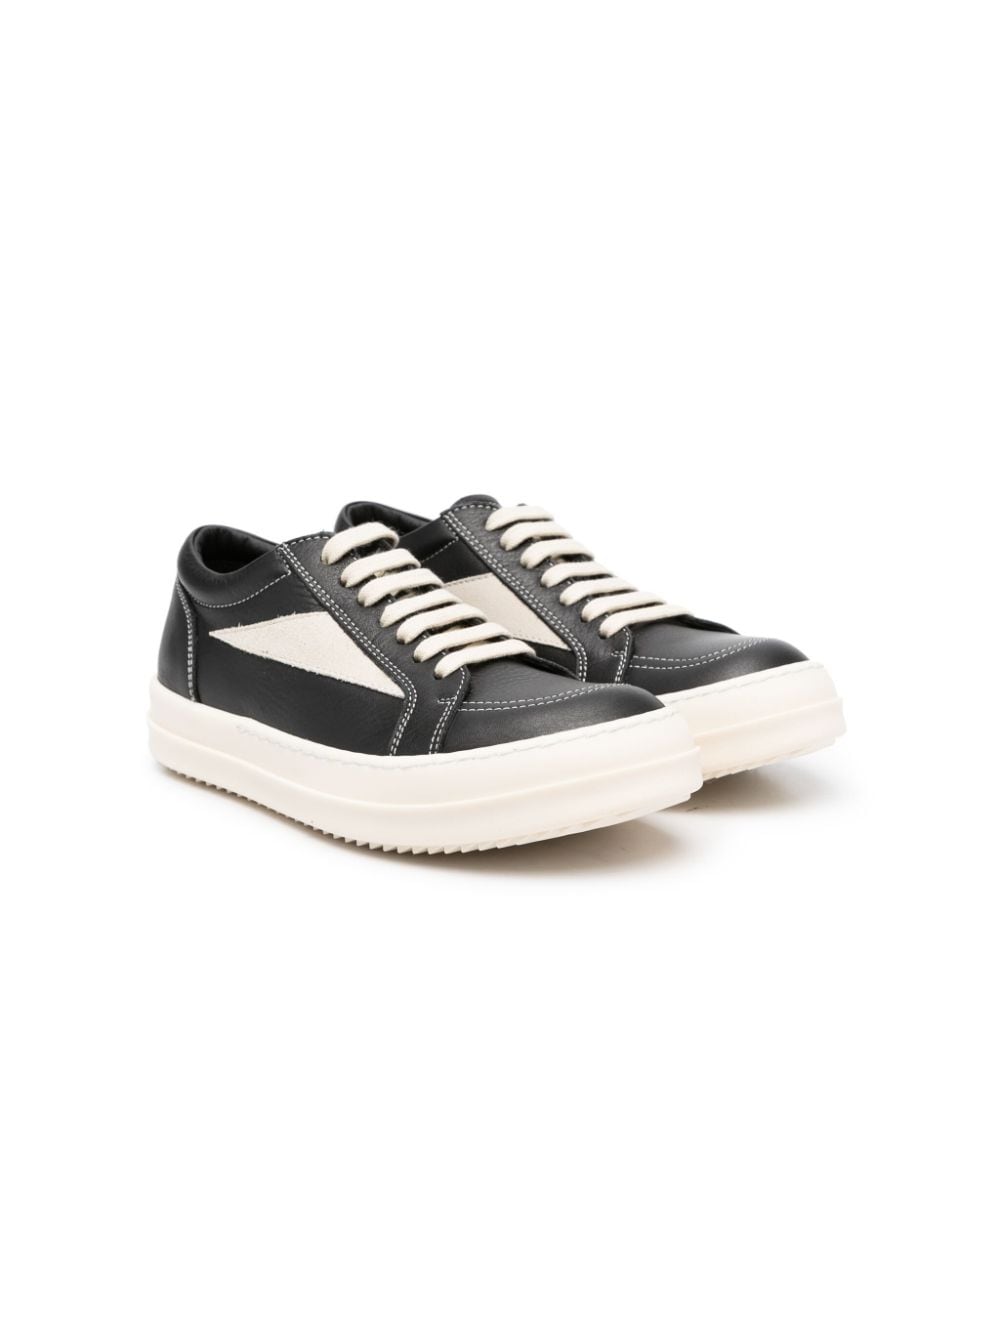 Rick Owens Vintage Leather Trainers